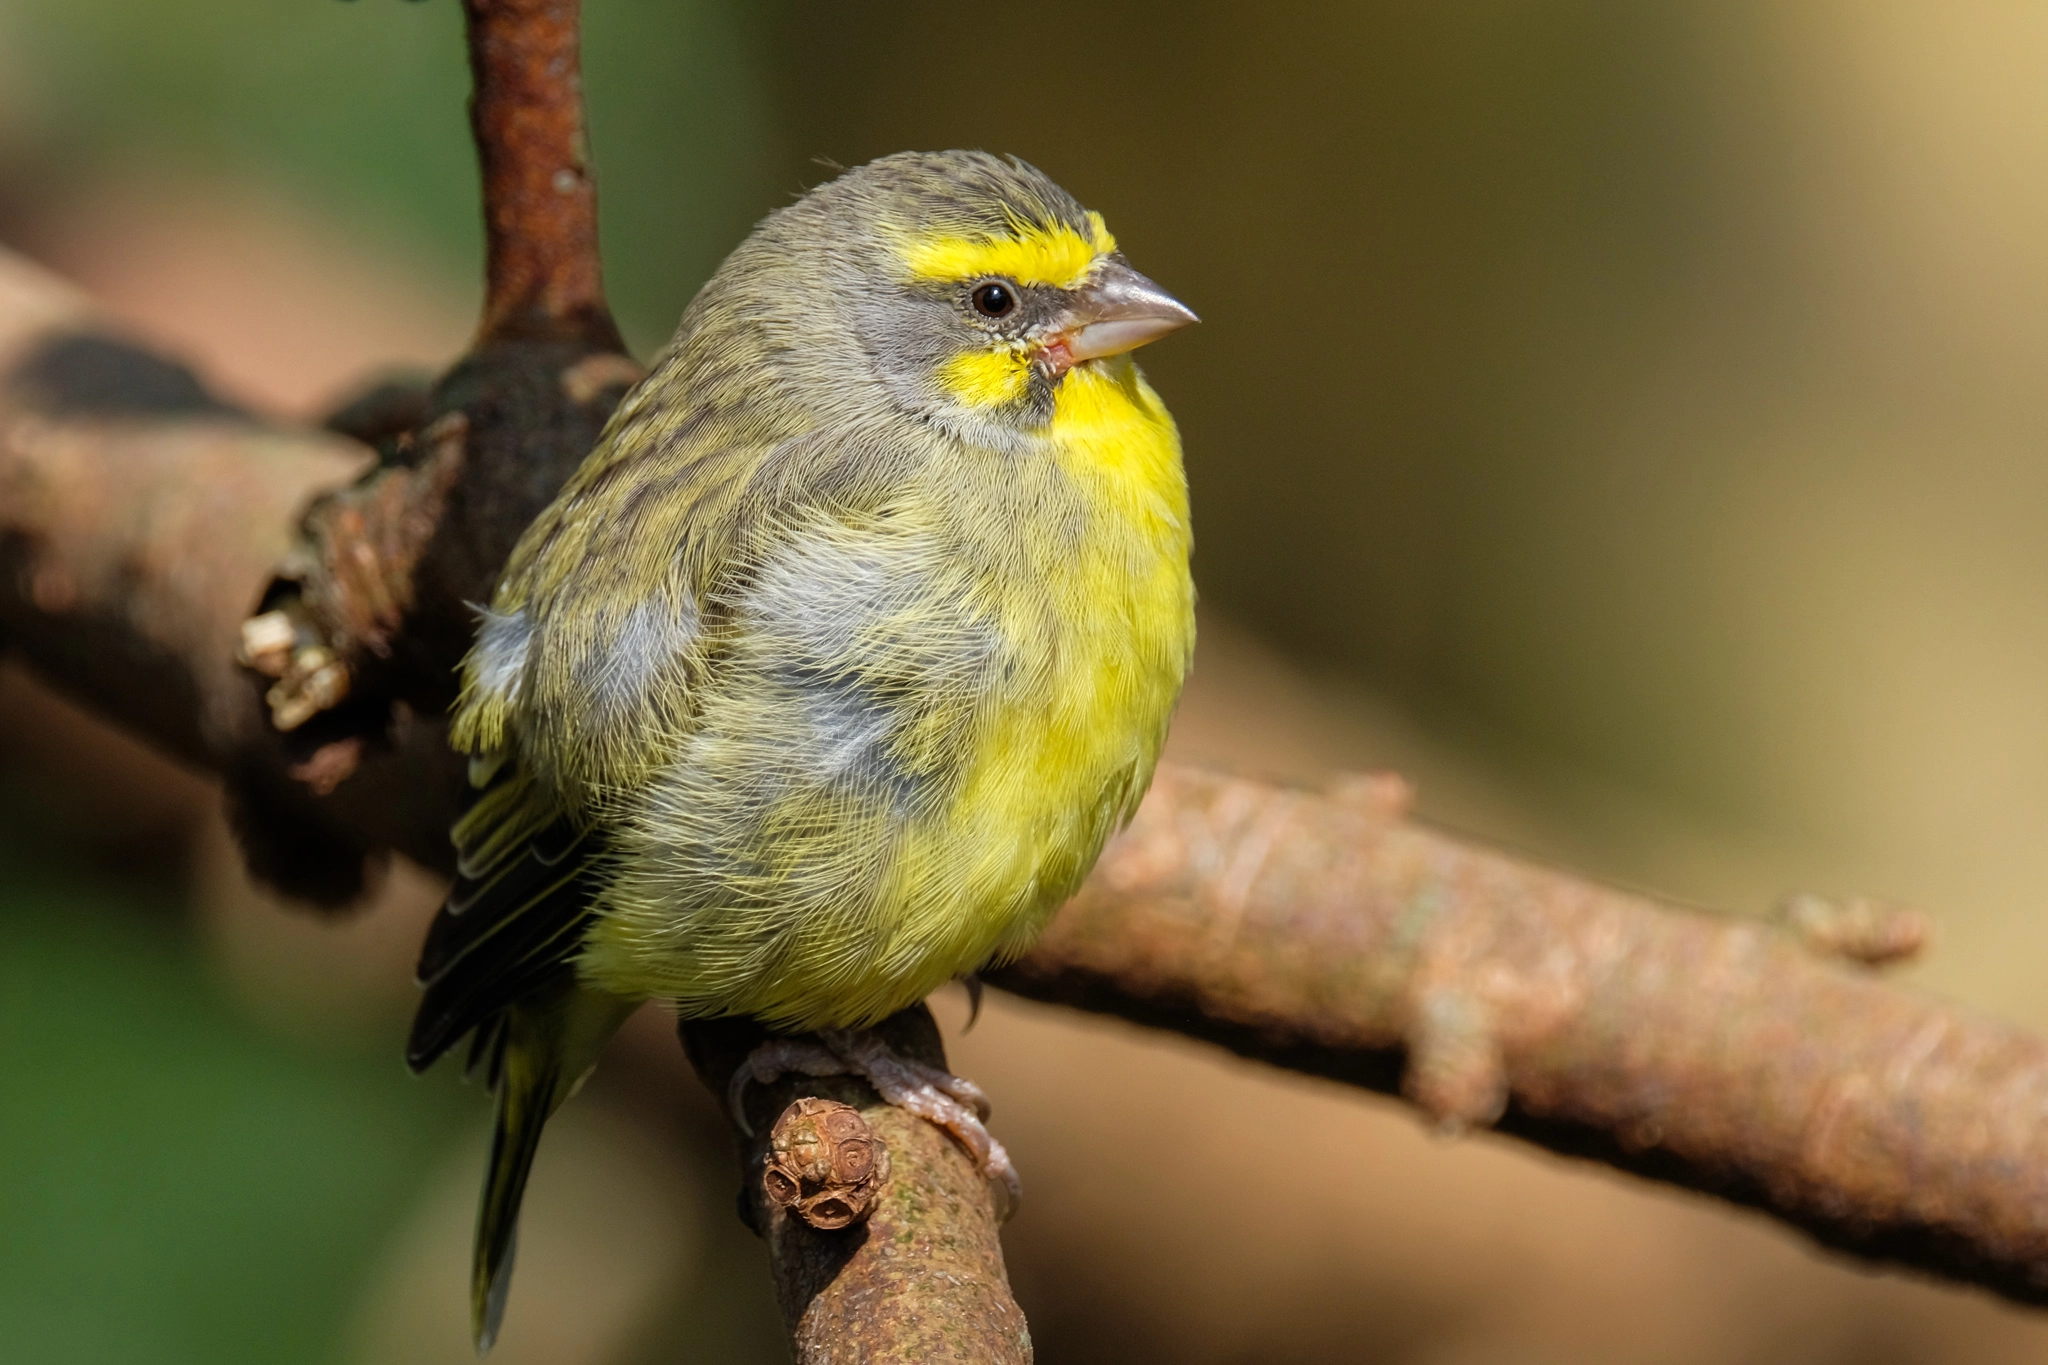 Fujifilm X-Pro2 + XF100-400mmF4.5-5.6 R LM OIS WR + 1.4x sample photo. Yellow-fronted canary photography